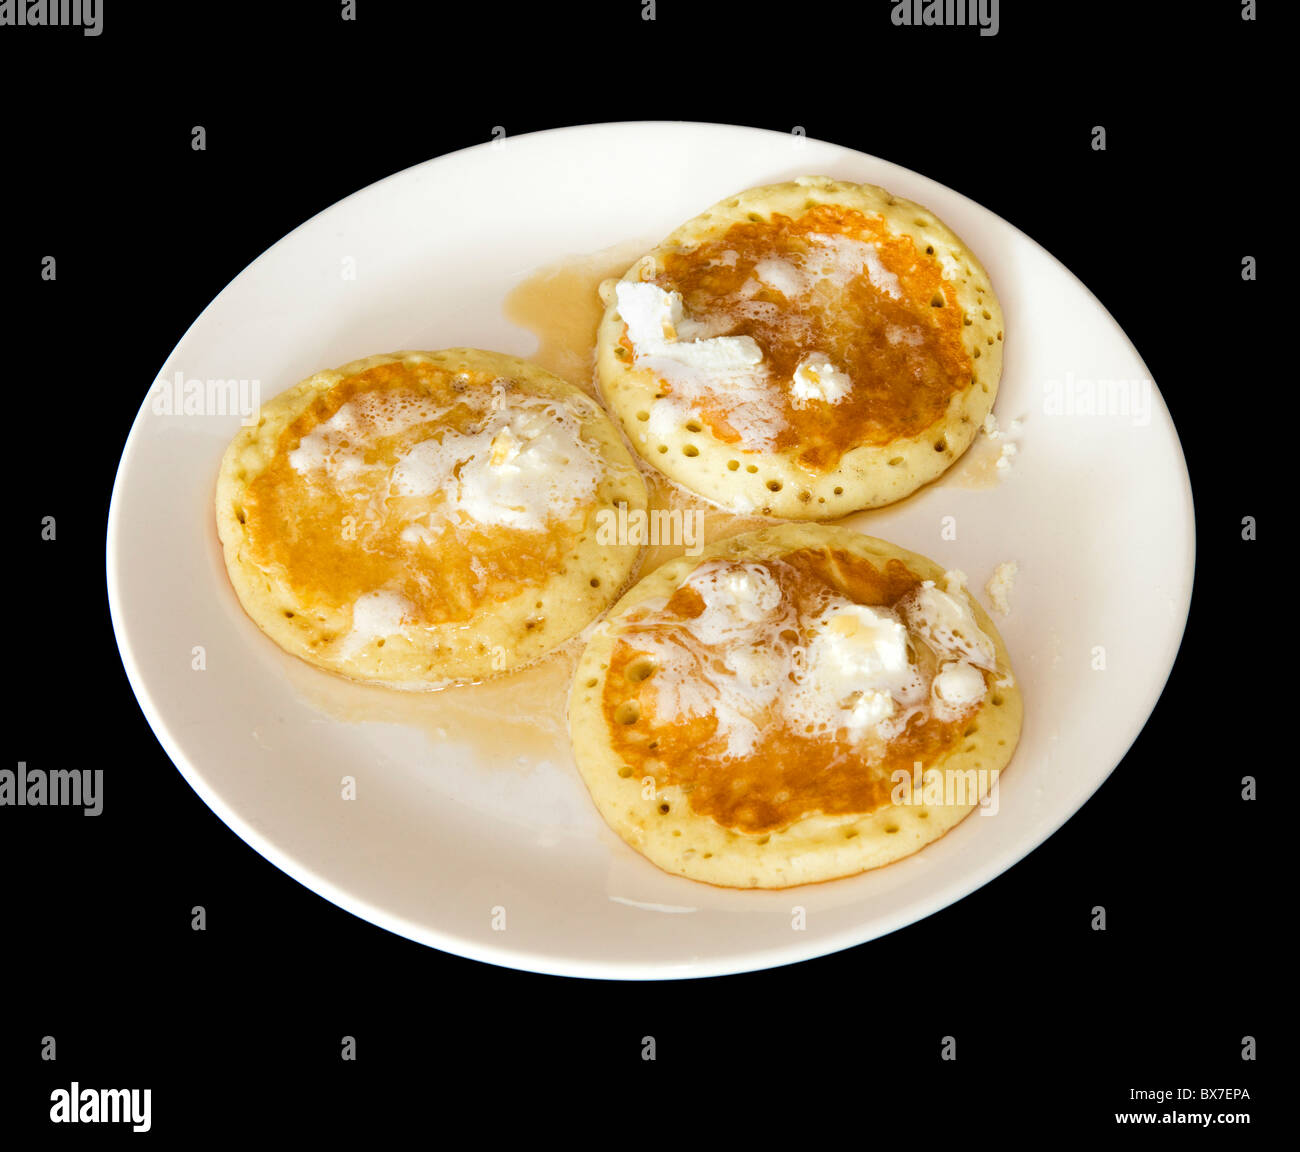 Plate of Buttermilk Pancakes with whipped butter and maple syrup, USA Stock Photo